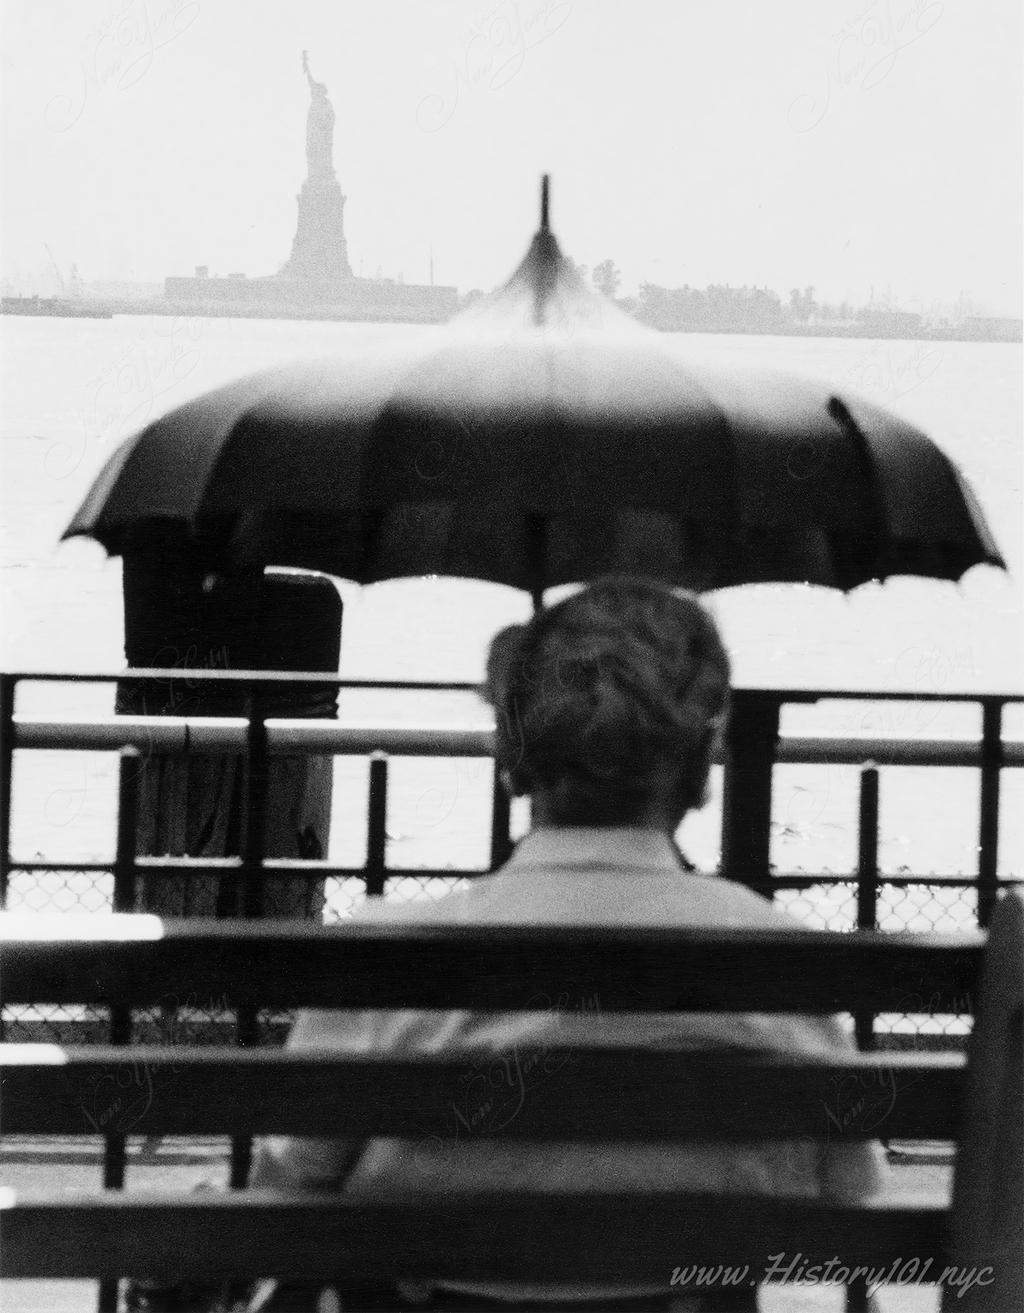 Photograph of a man holding an open umbrella, sitting on a dock with a view of the Statue of Liberty across the harbor.